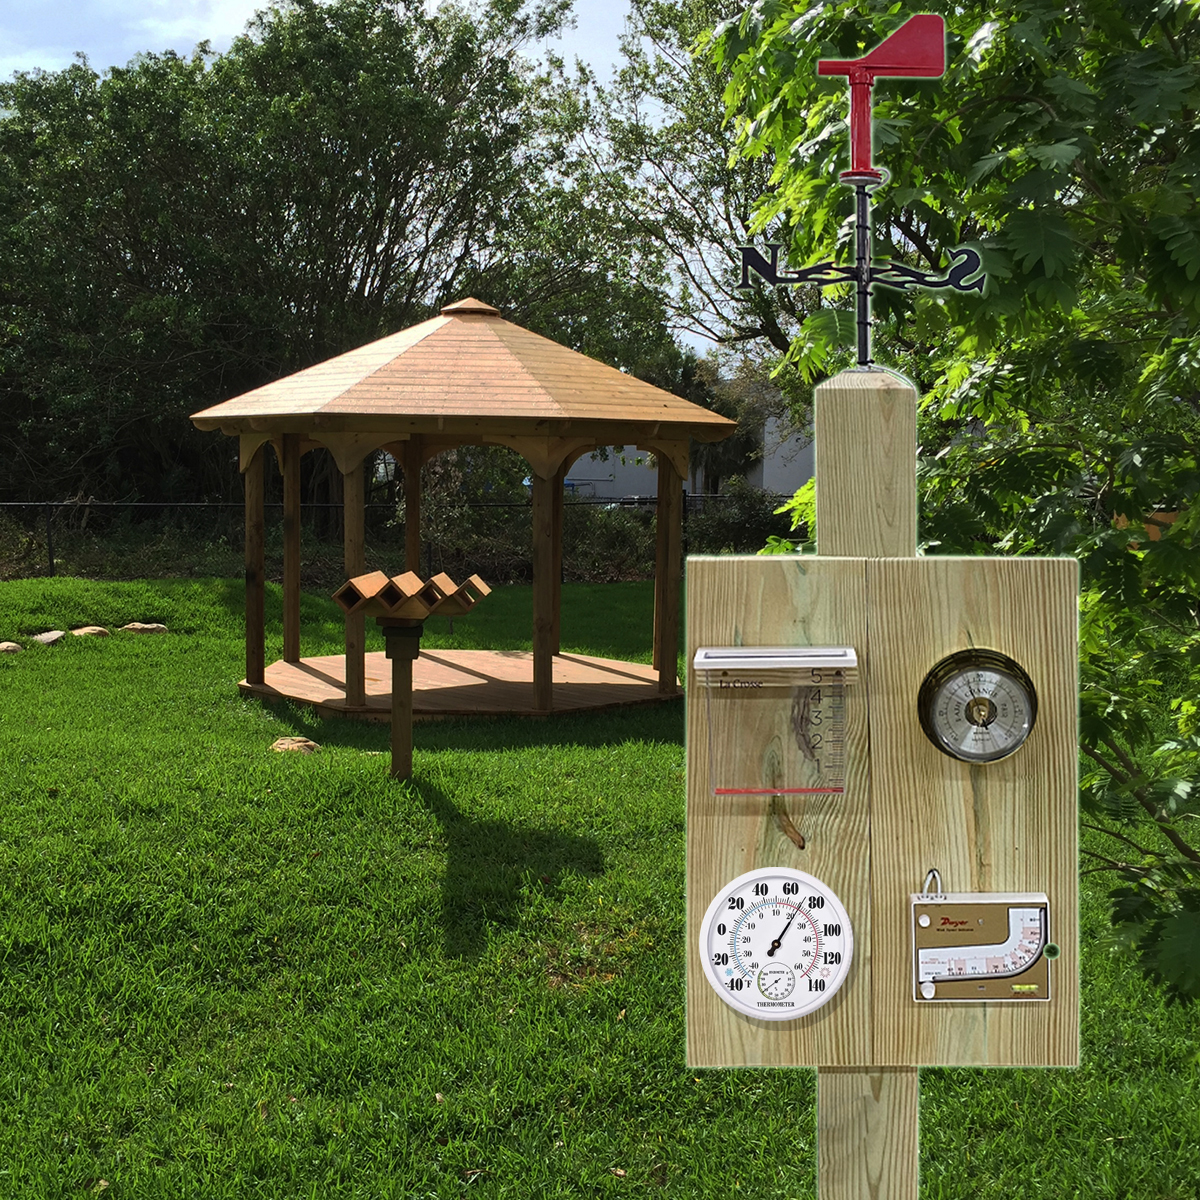 803-01 | Outdoor weather station